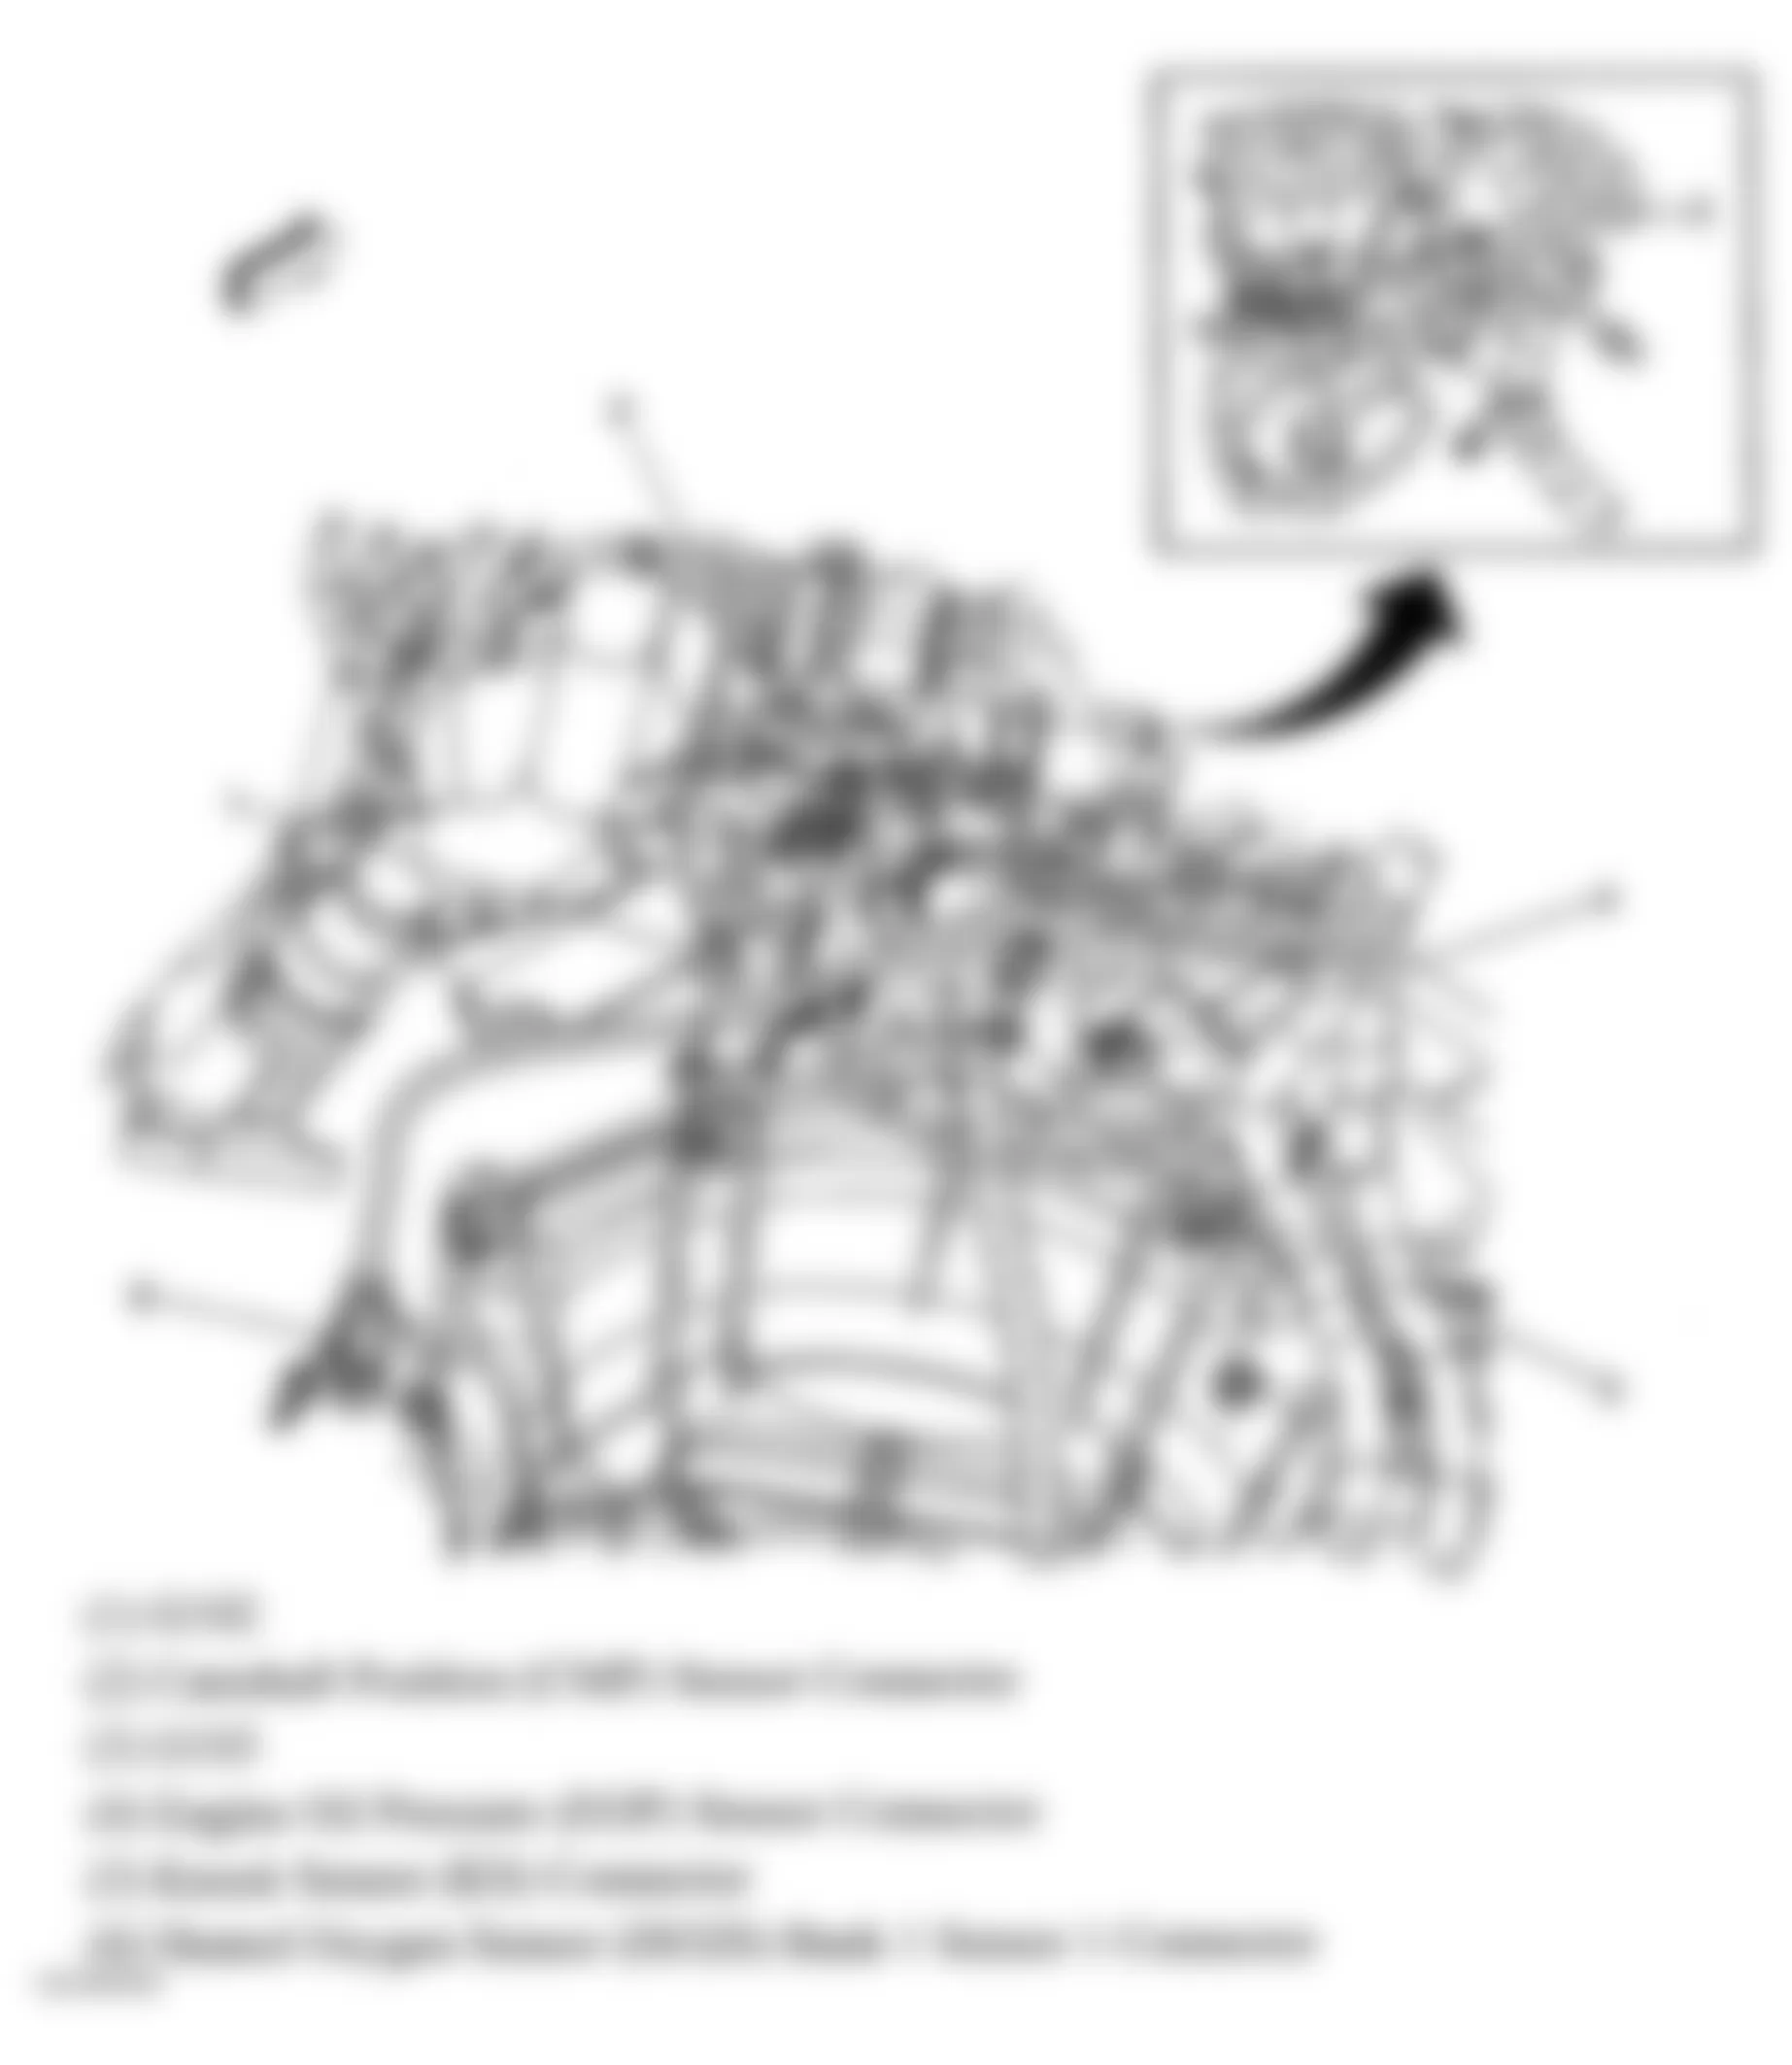 GMC Savana Special G3500 2009 - Component Locations -  Rear Of Engine (4.3L)